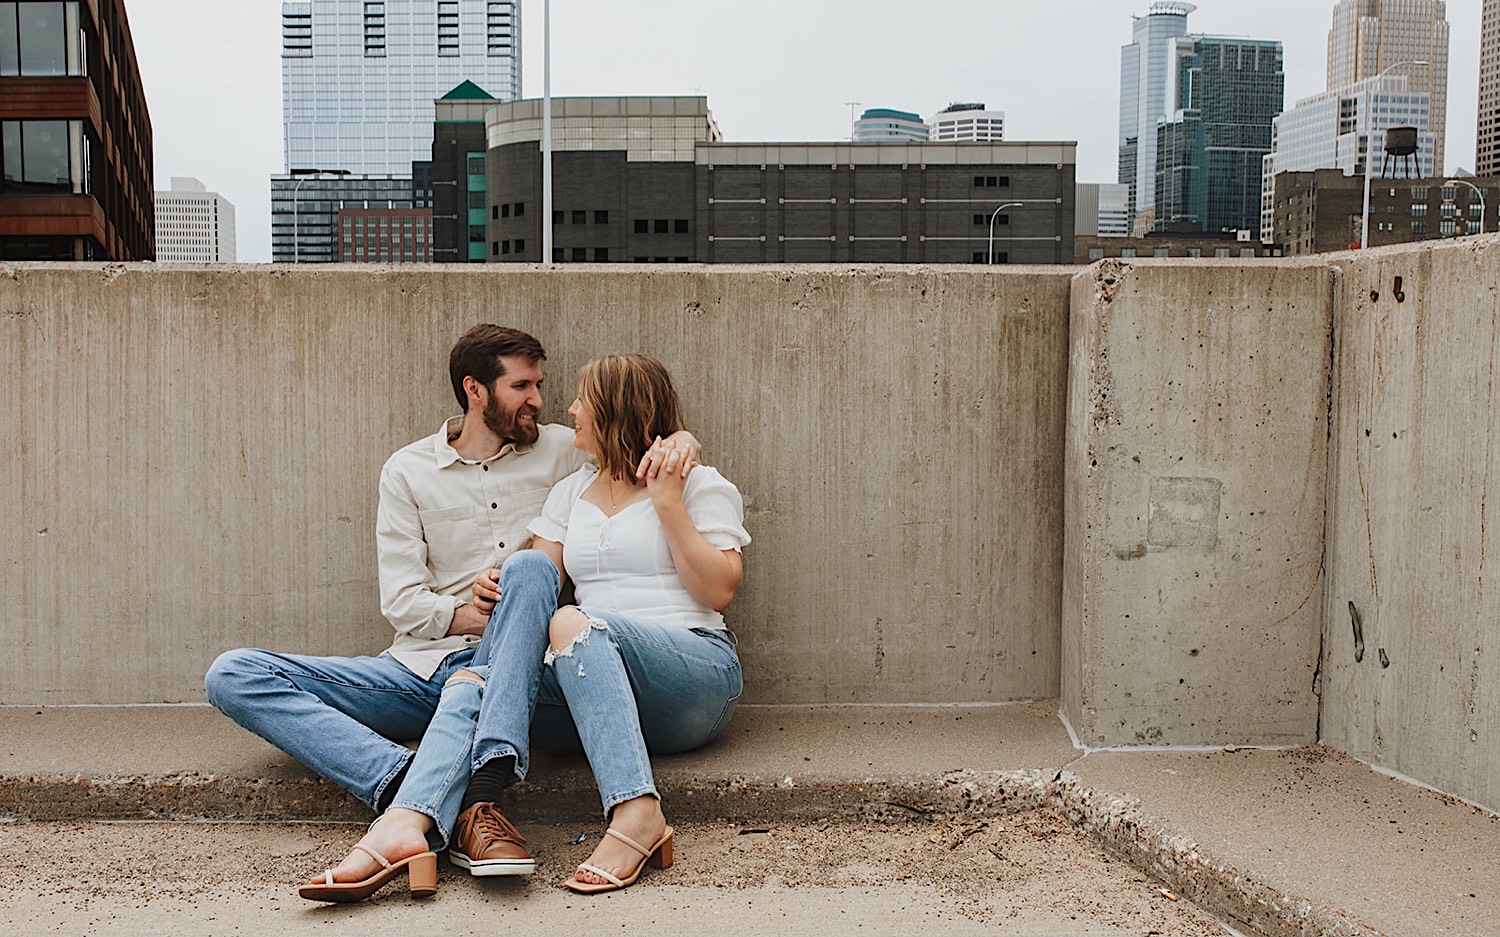 While having their engagement photos taken a couple sit next to one another and smile at each other while on the top level of a parking garage in downtown Minneapolis